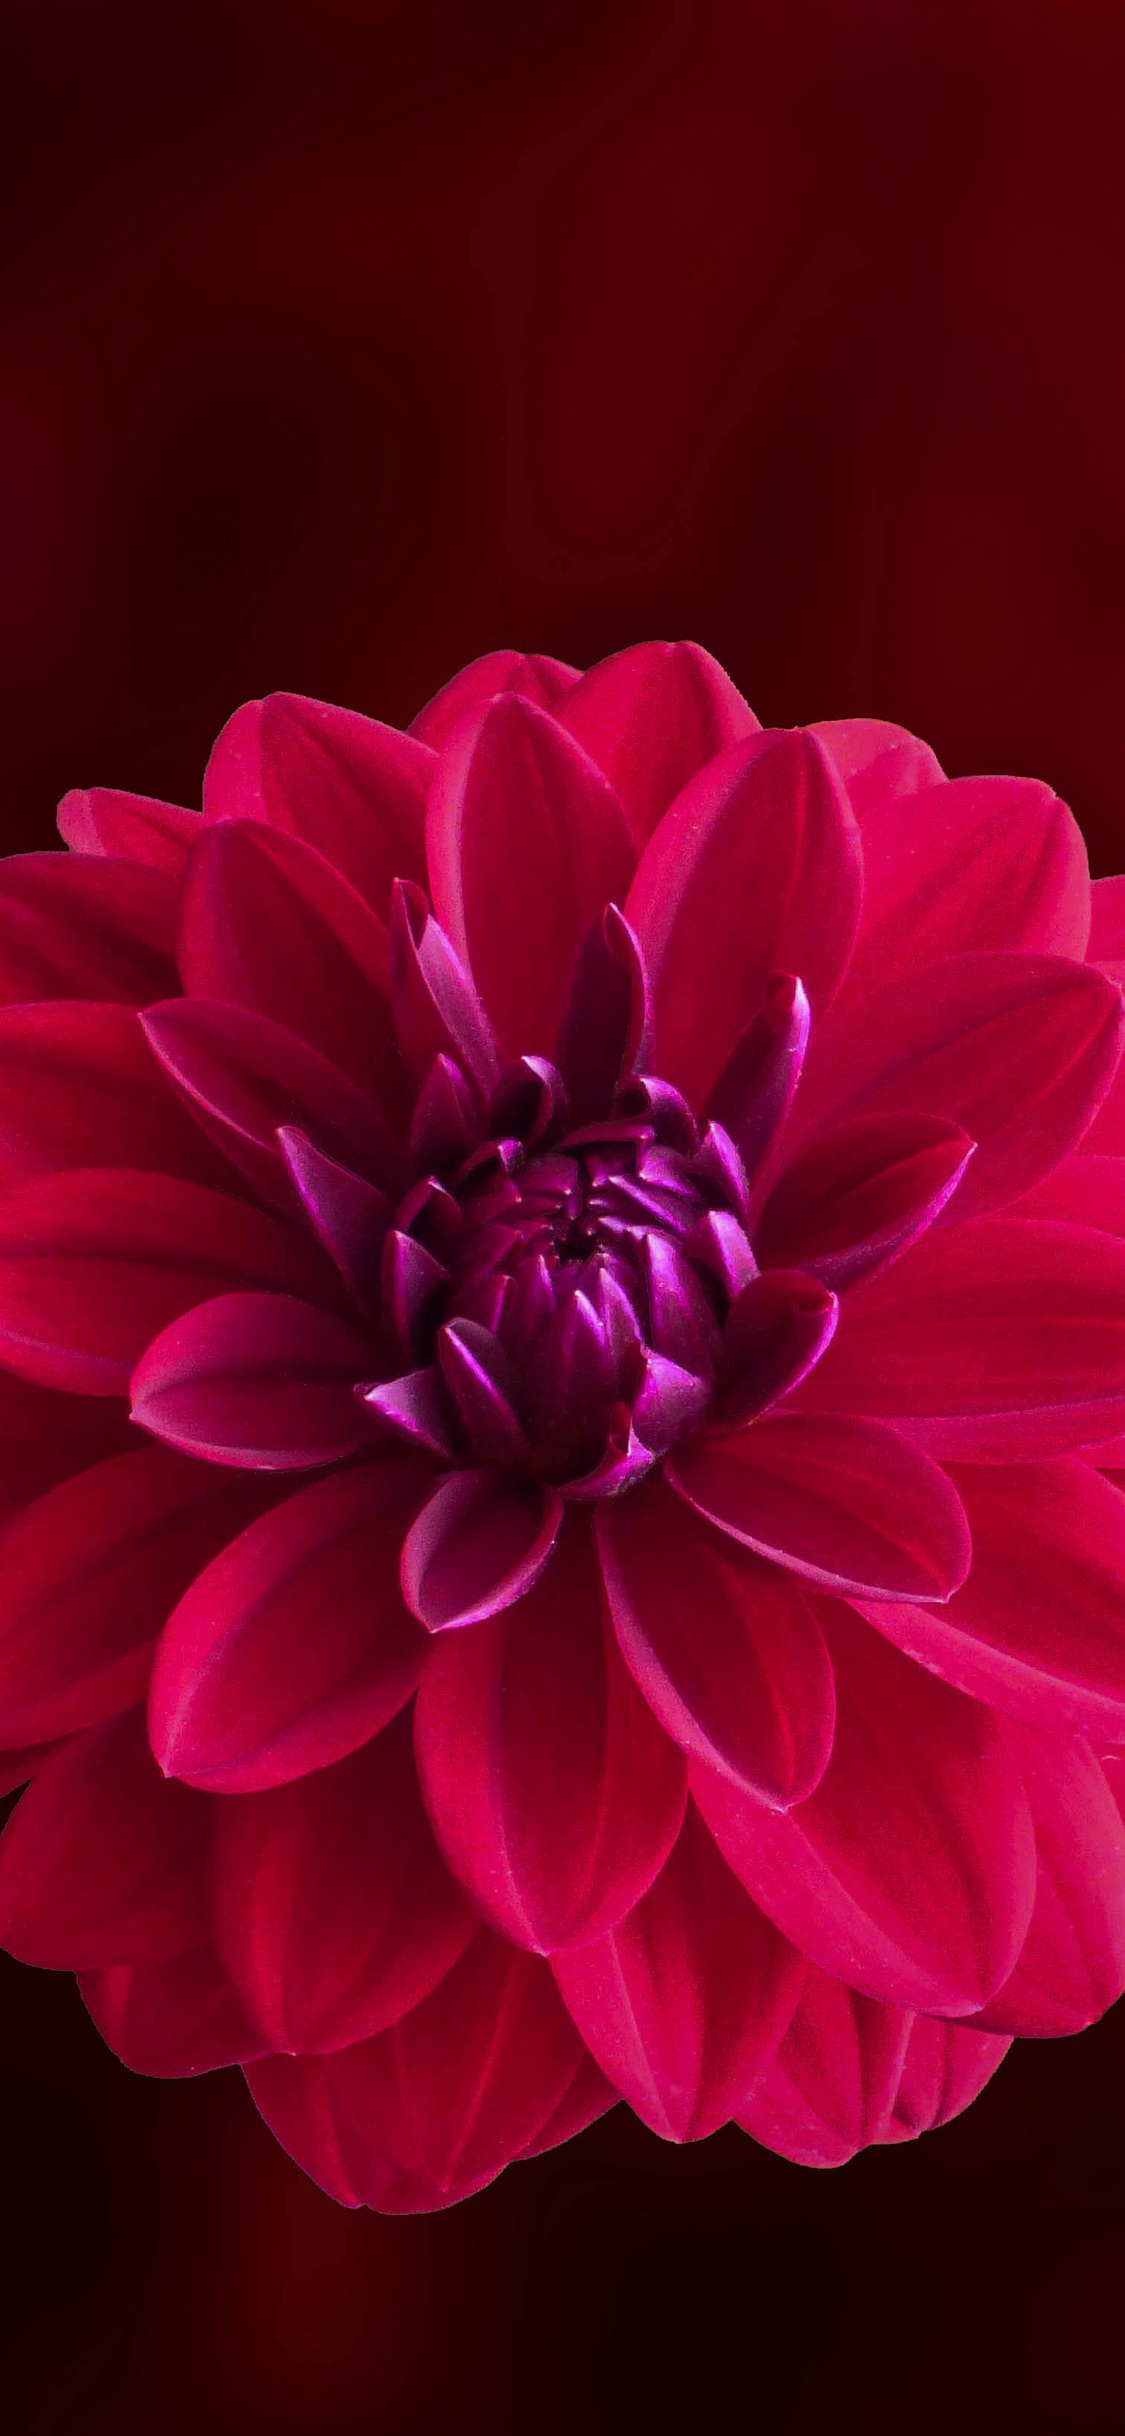 Pink Dahlia Flower - Hd Red Wallpaper For S7 Edge , HD Wallpaper & Backgrounds